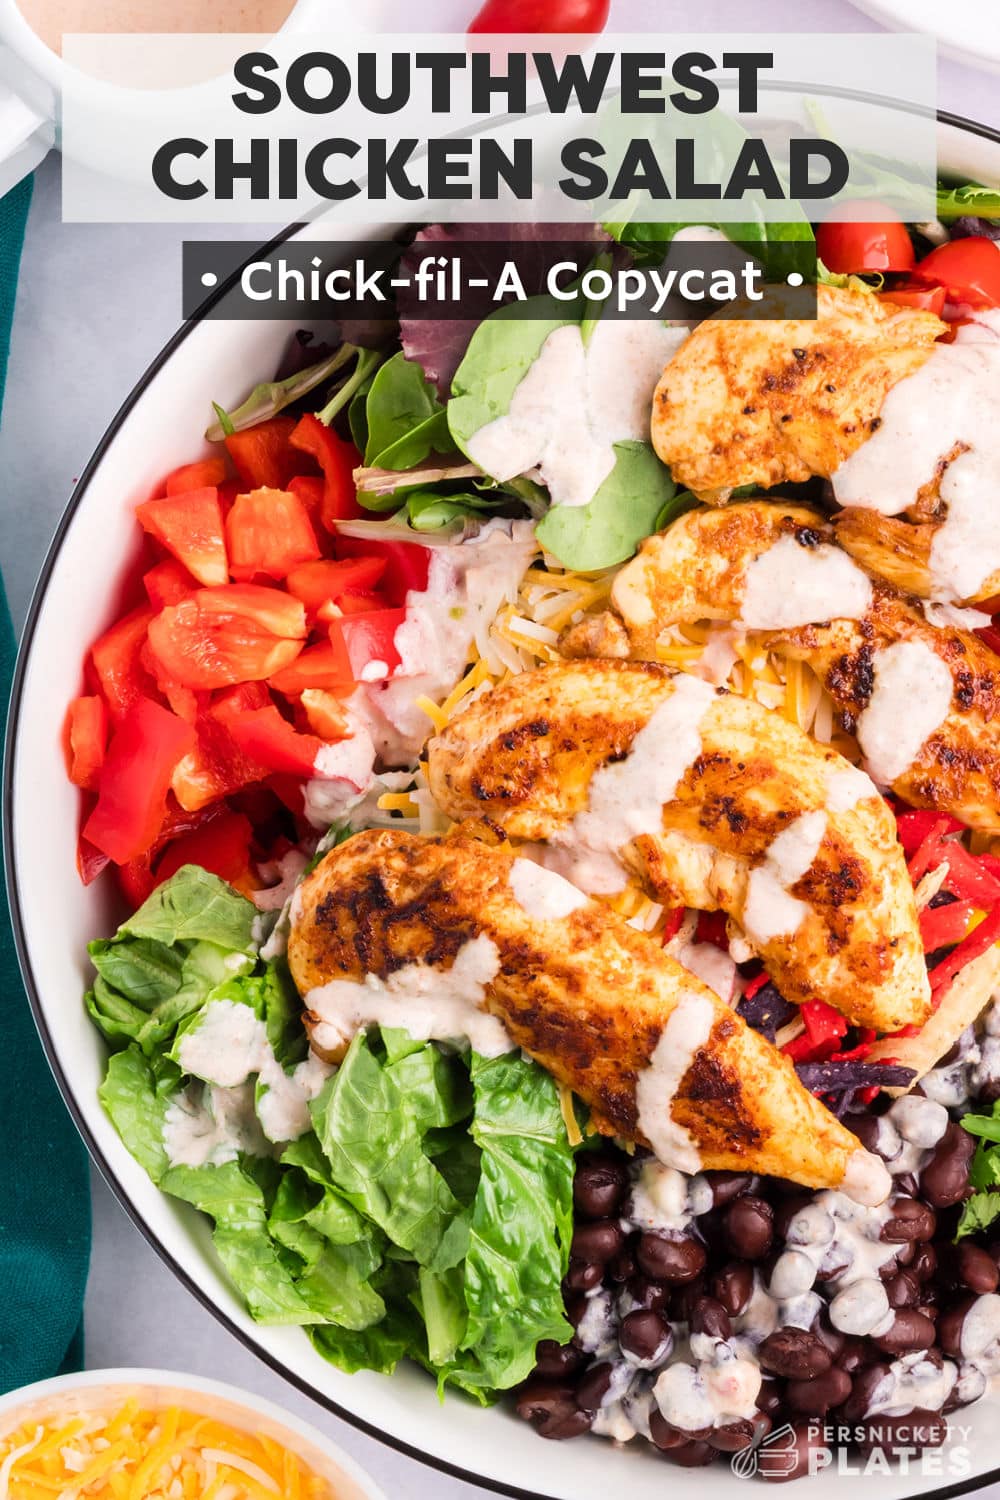 This fresh Chick-fil-A salad is a perfect copycat! Southwest chicken salad starts with spicy grilled chicken, mixed with fresh veggies, topped with a spicy-sweet salad dressing, and finished with crunchy tortilla strips. This colorful salad is loaded with southwest flavors and plenty of texture! | www.persnicketyplates.com